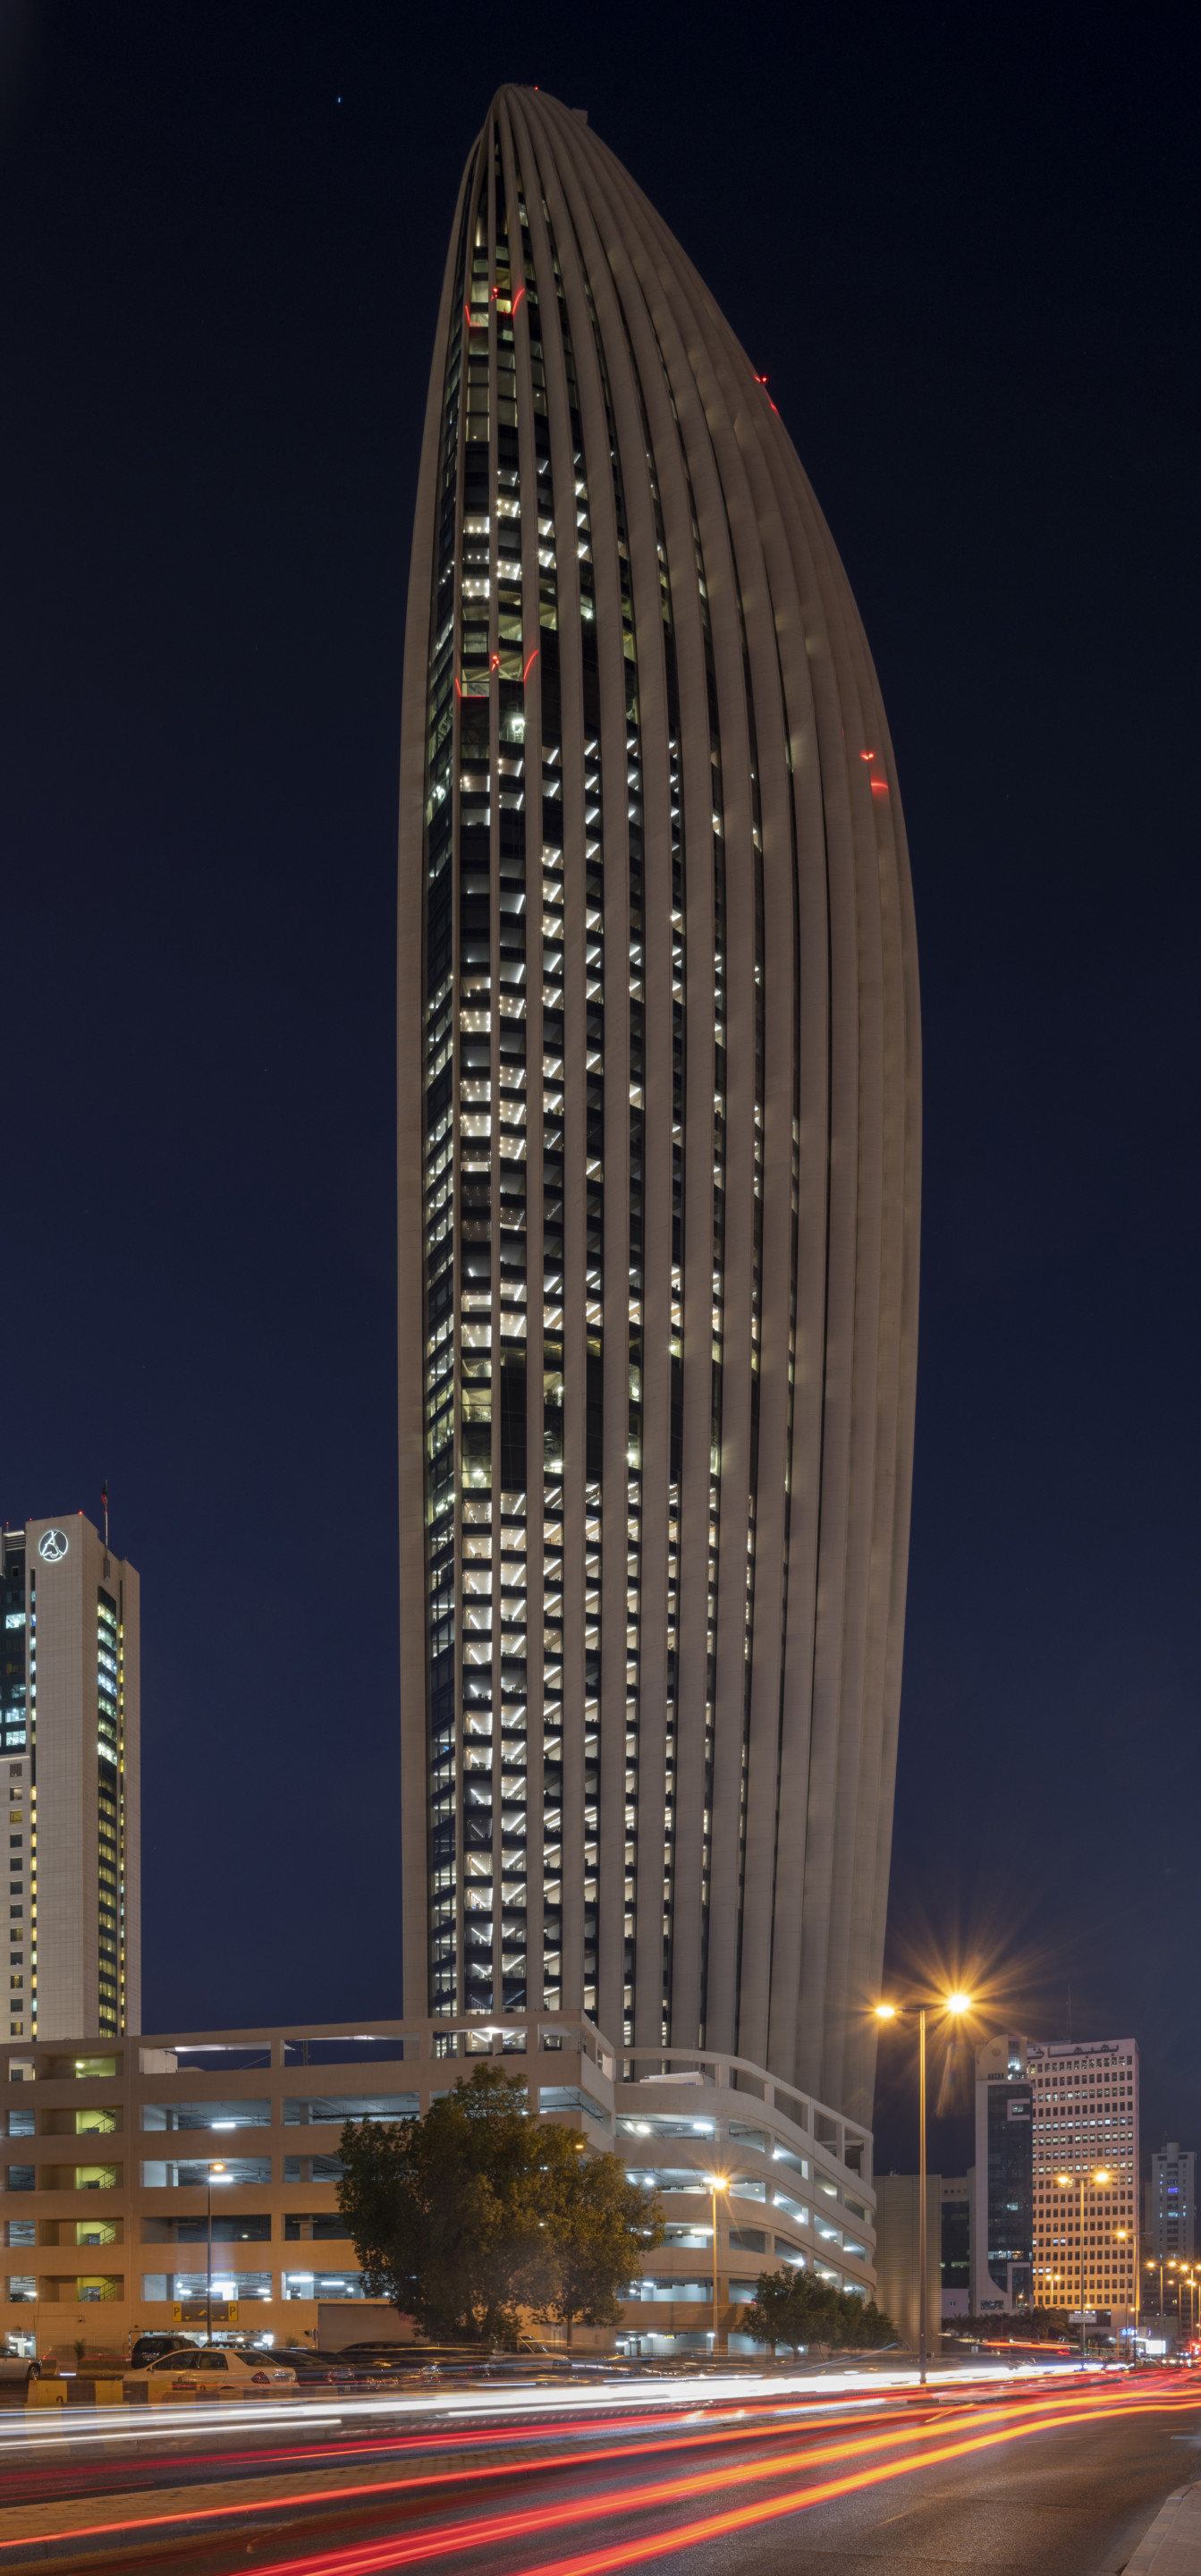 a rounded skyscraper pictured at night